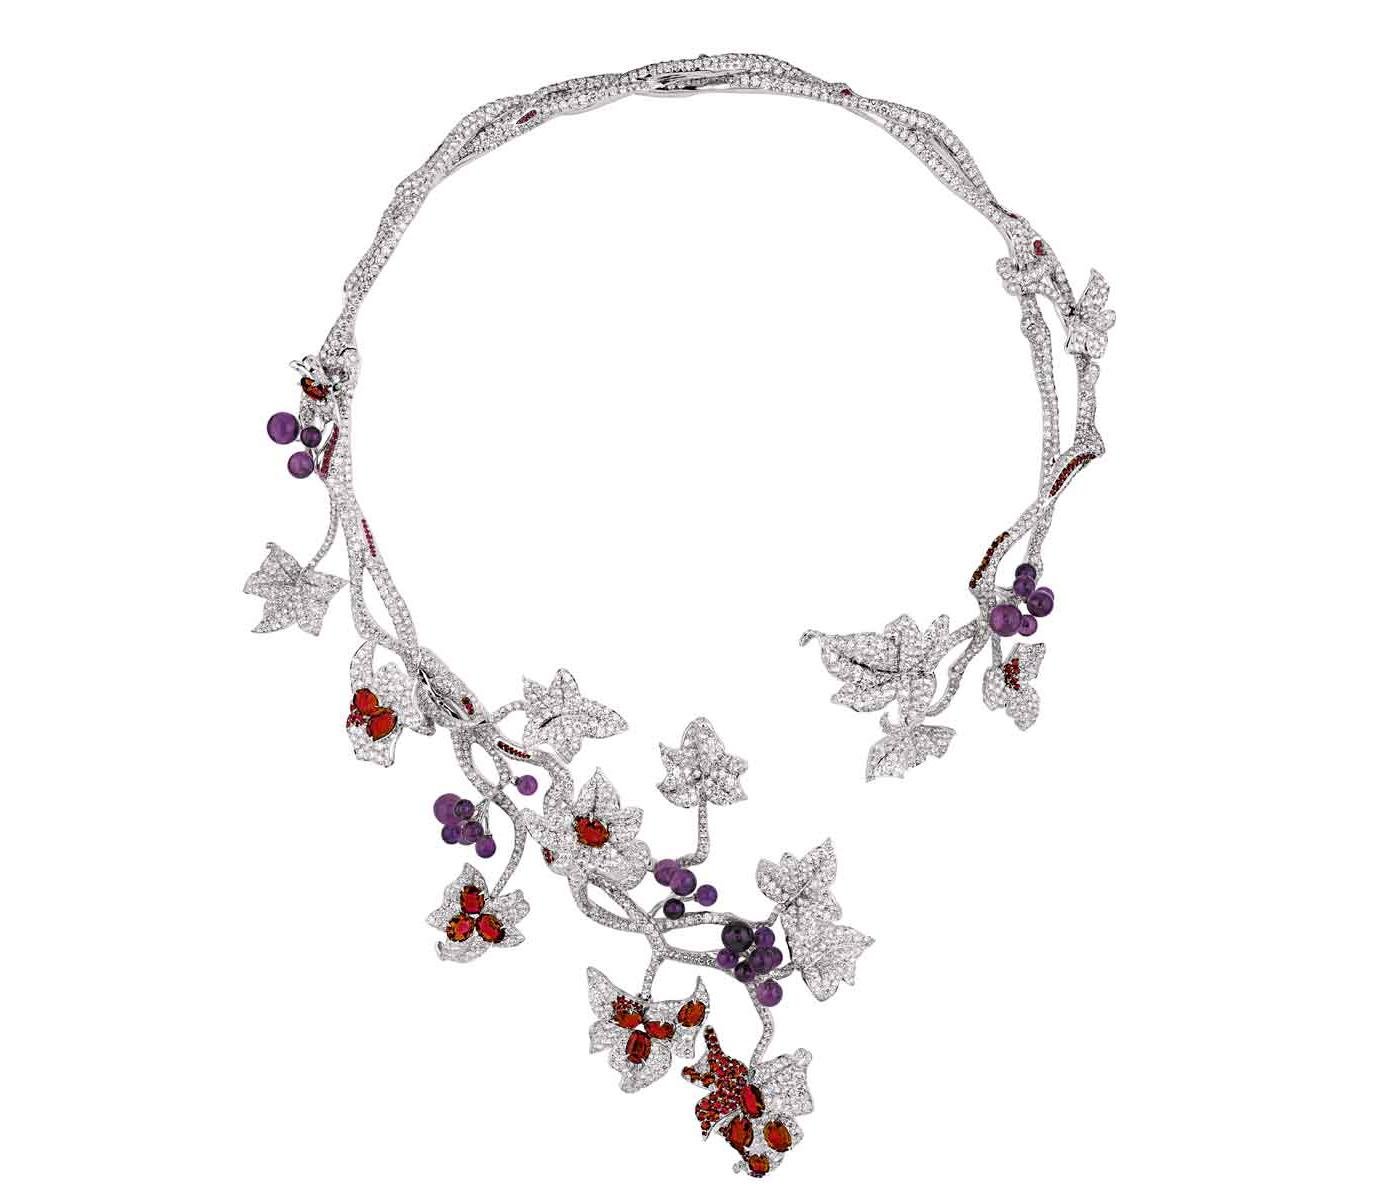 Necklace by Dior Joaillerie